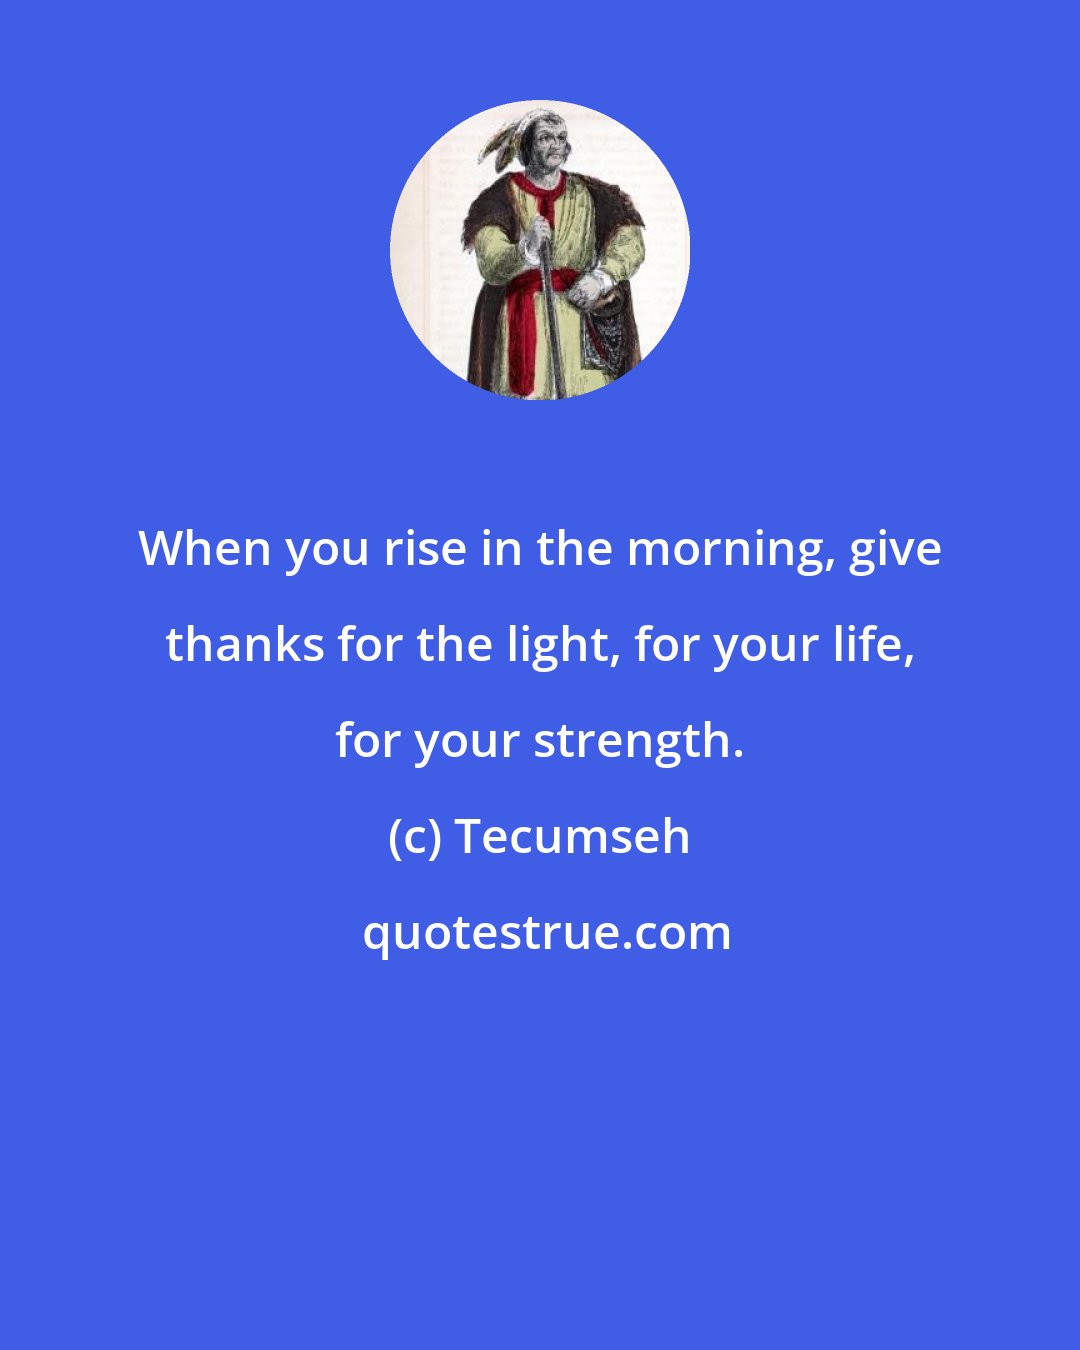 Tecumseh: When you rise in the morning, give thanks for the light, for your life, for your strength.